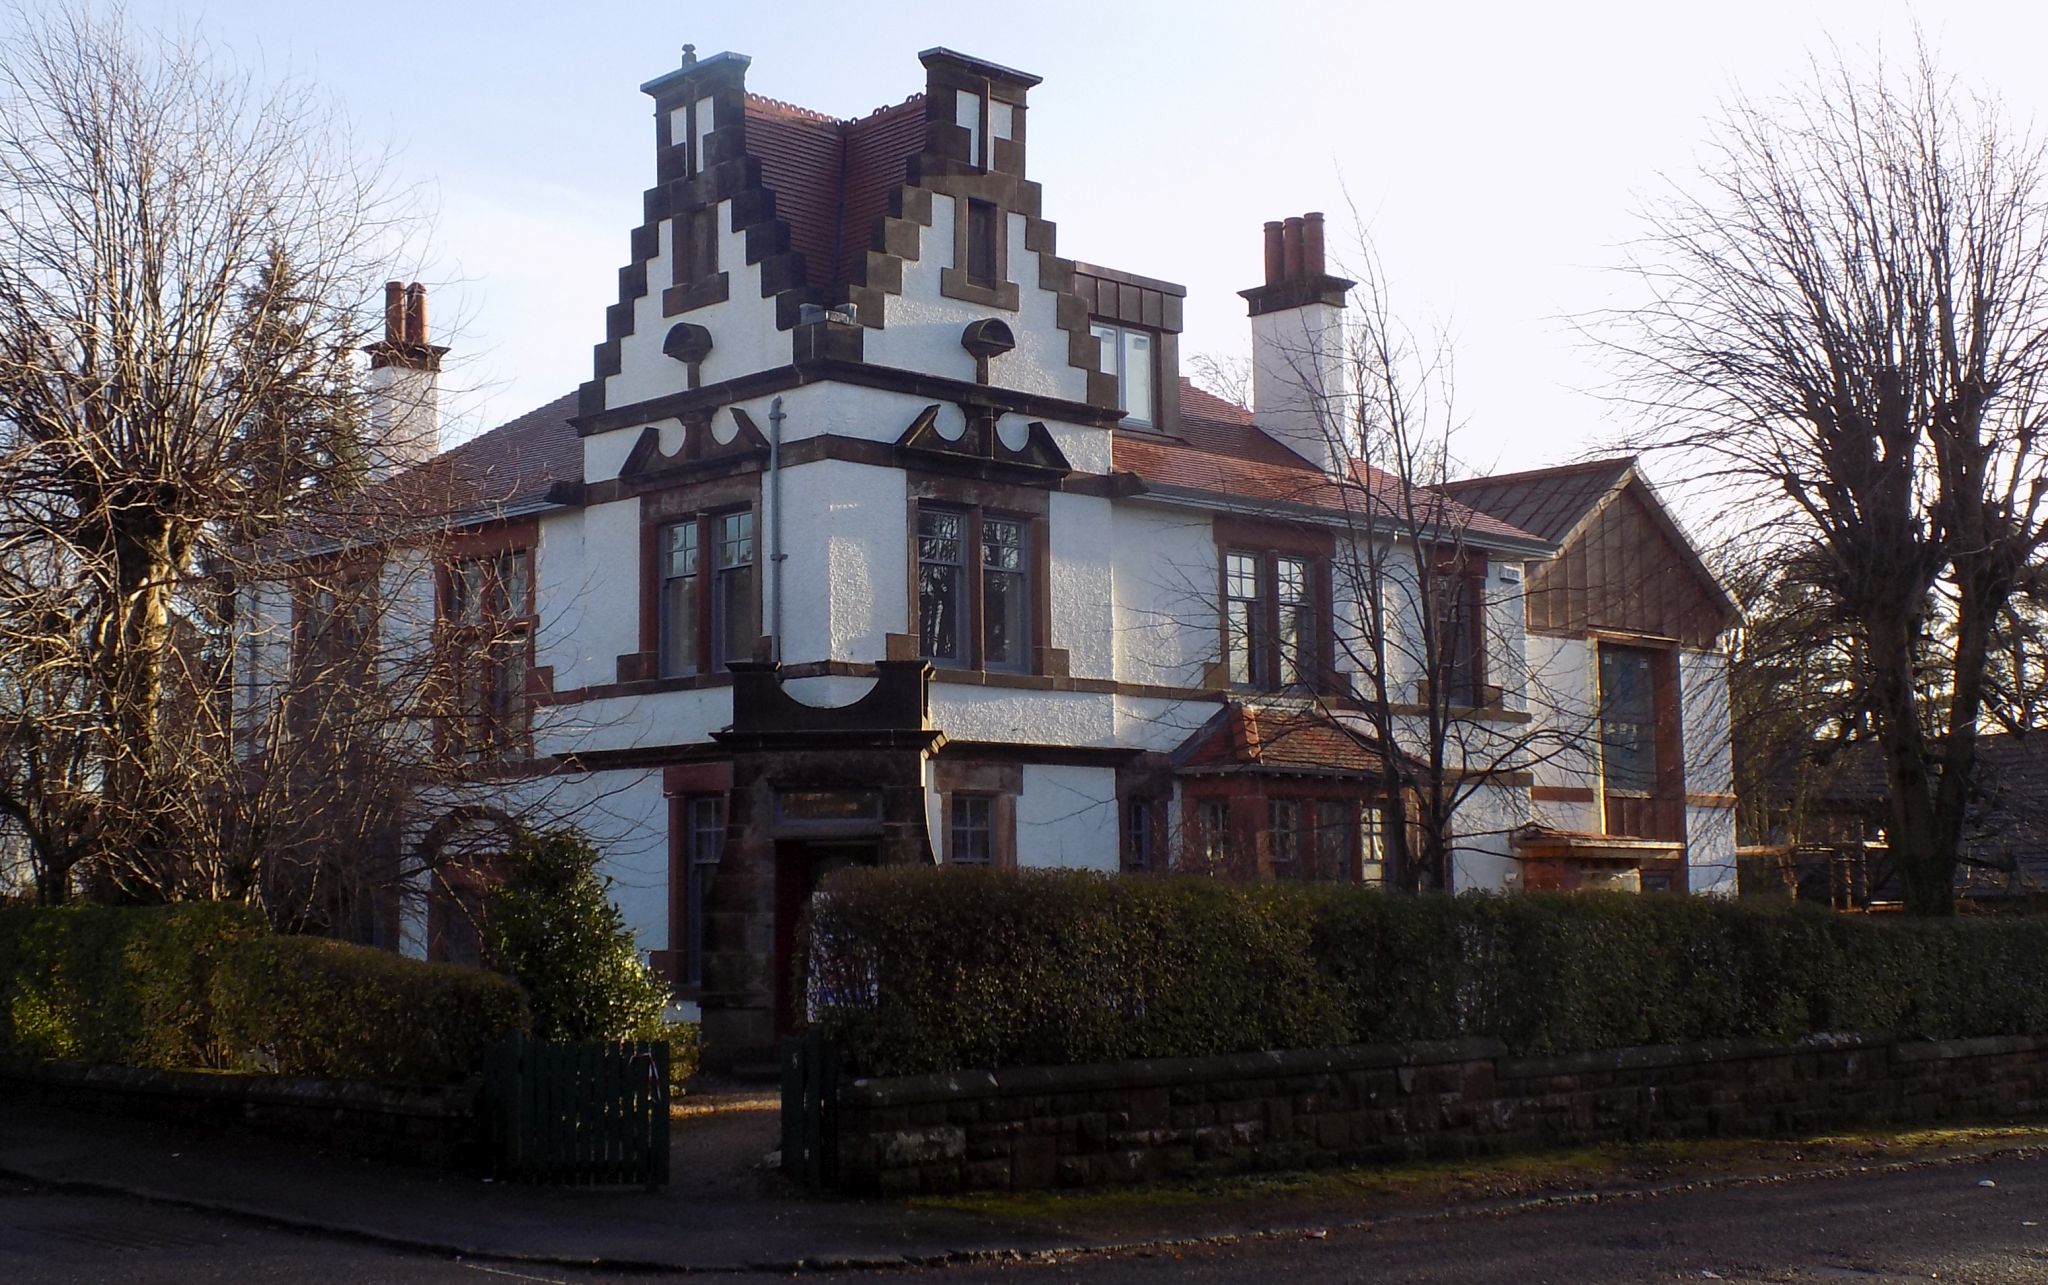 Victorian Villa in Thorn Road part of the Conservation Area of Bearsden